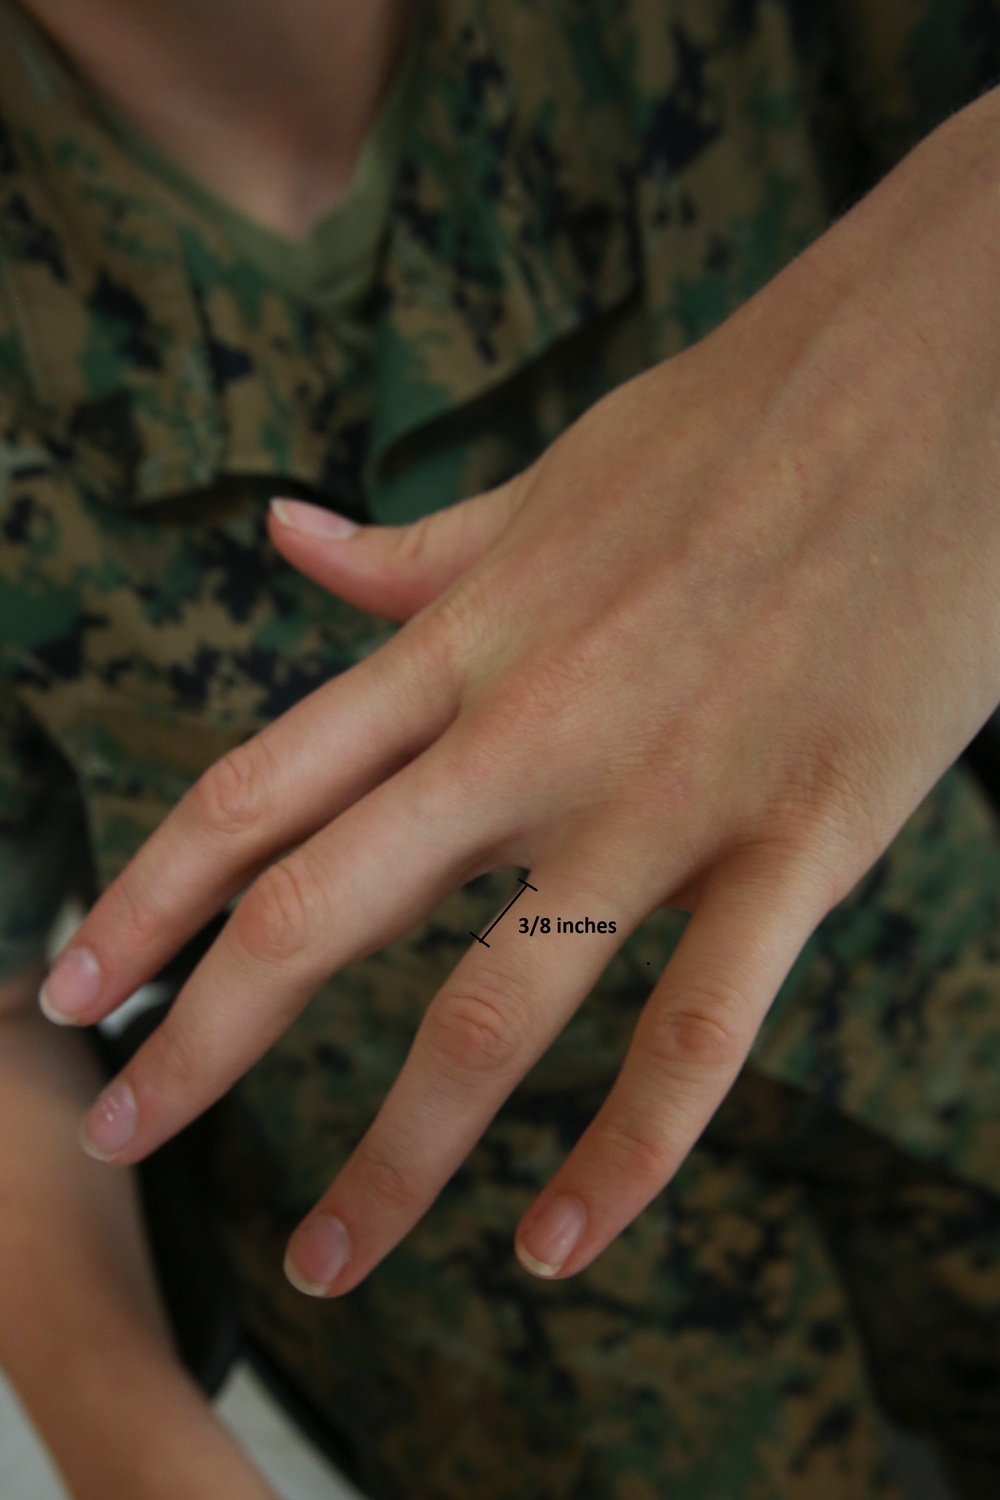 Right to bare arms: Marine Corps new tattoo policy